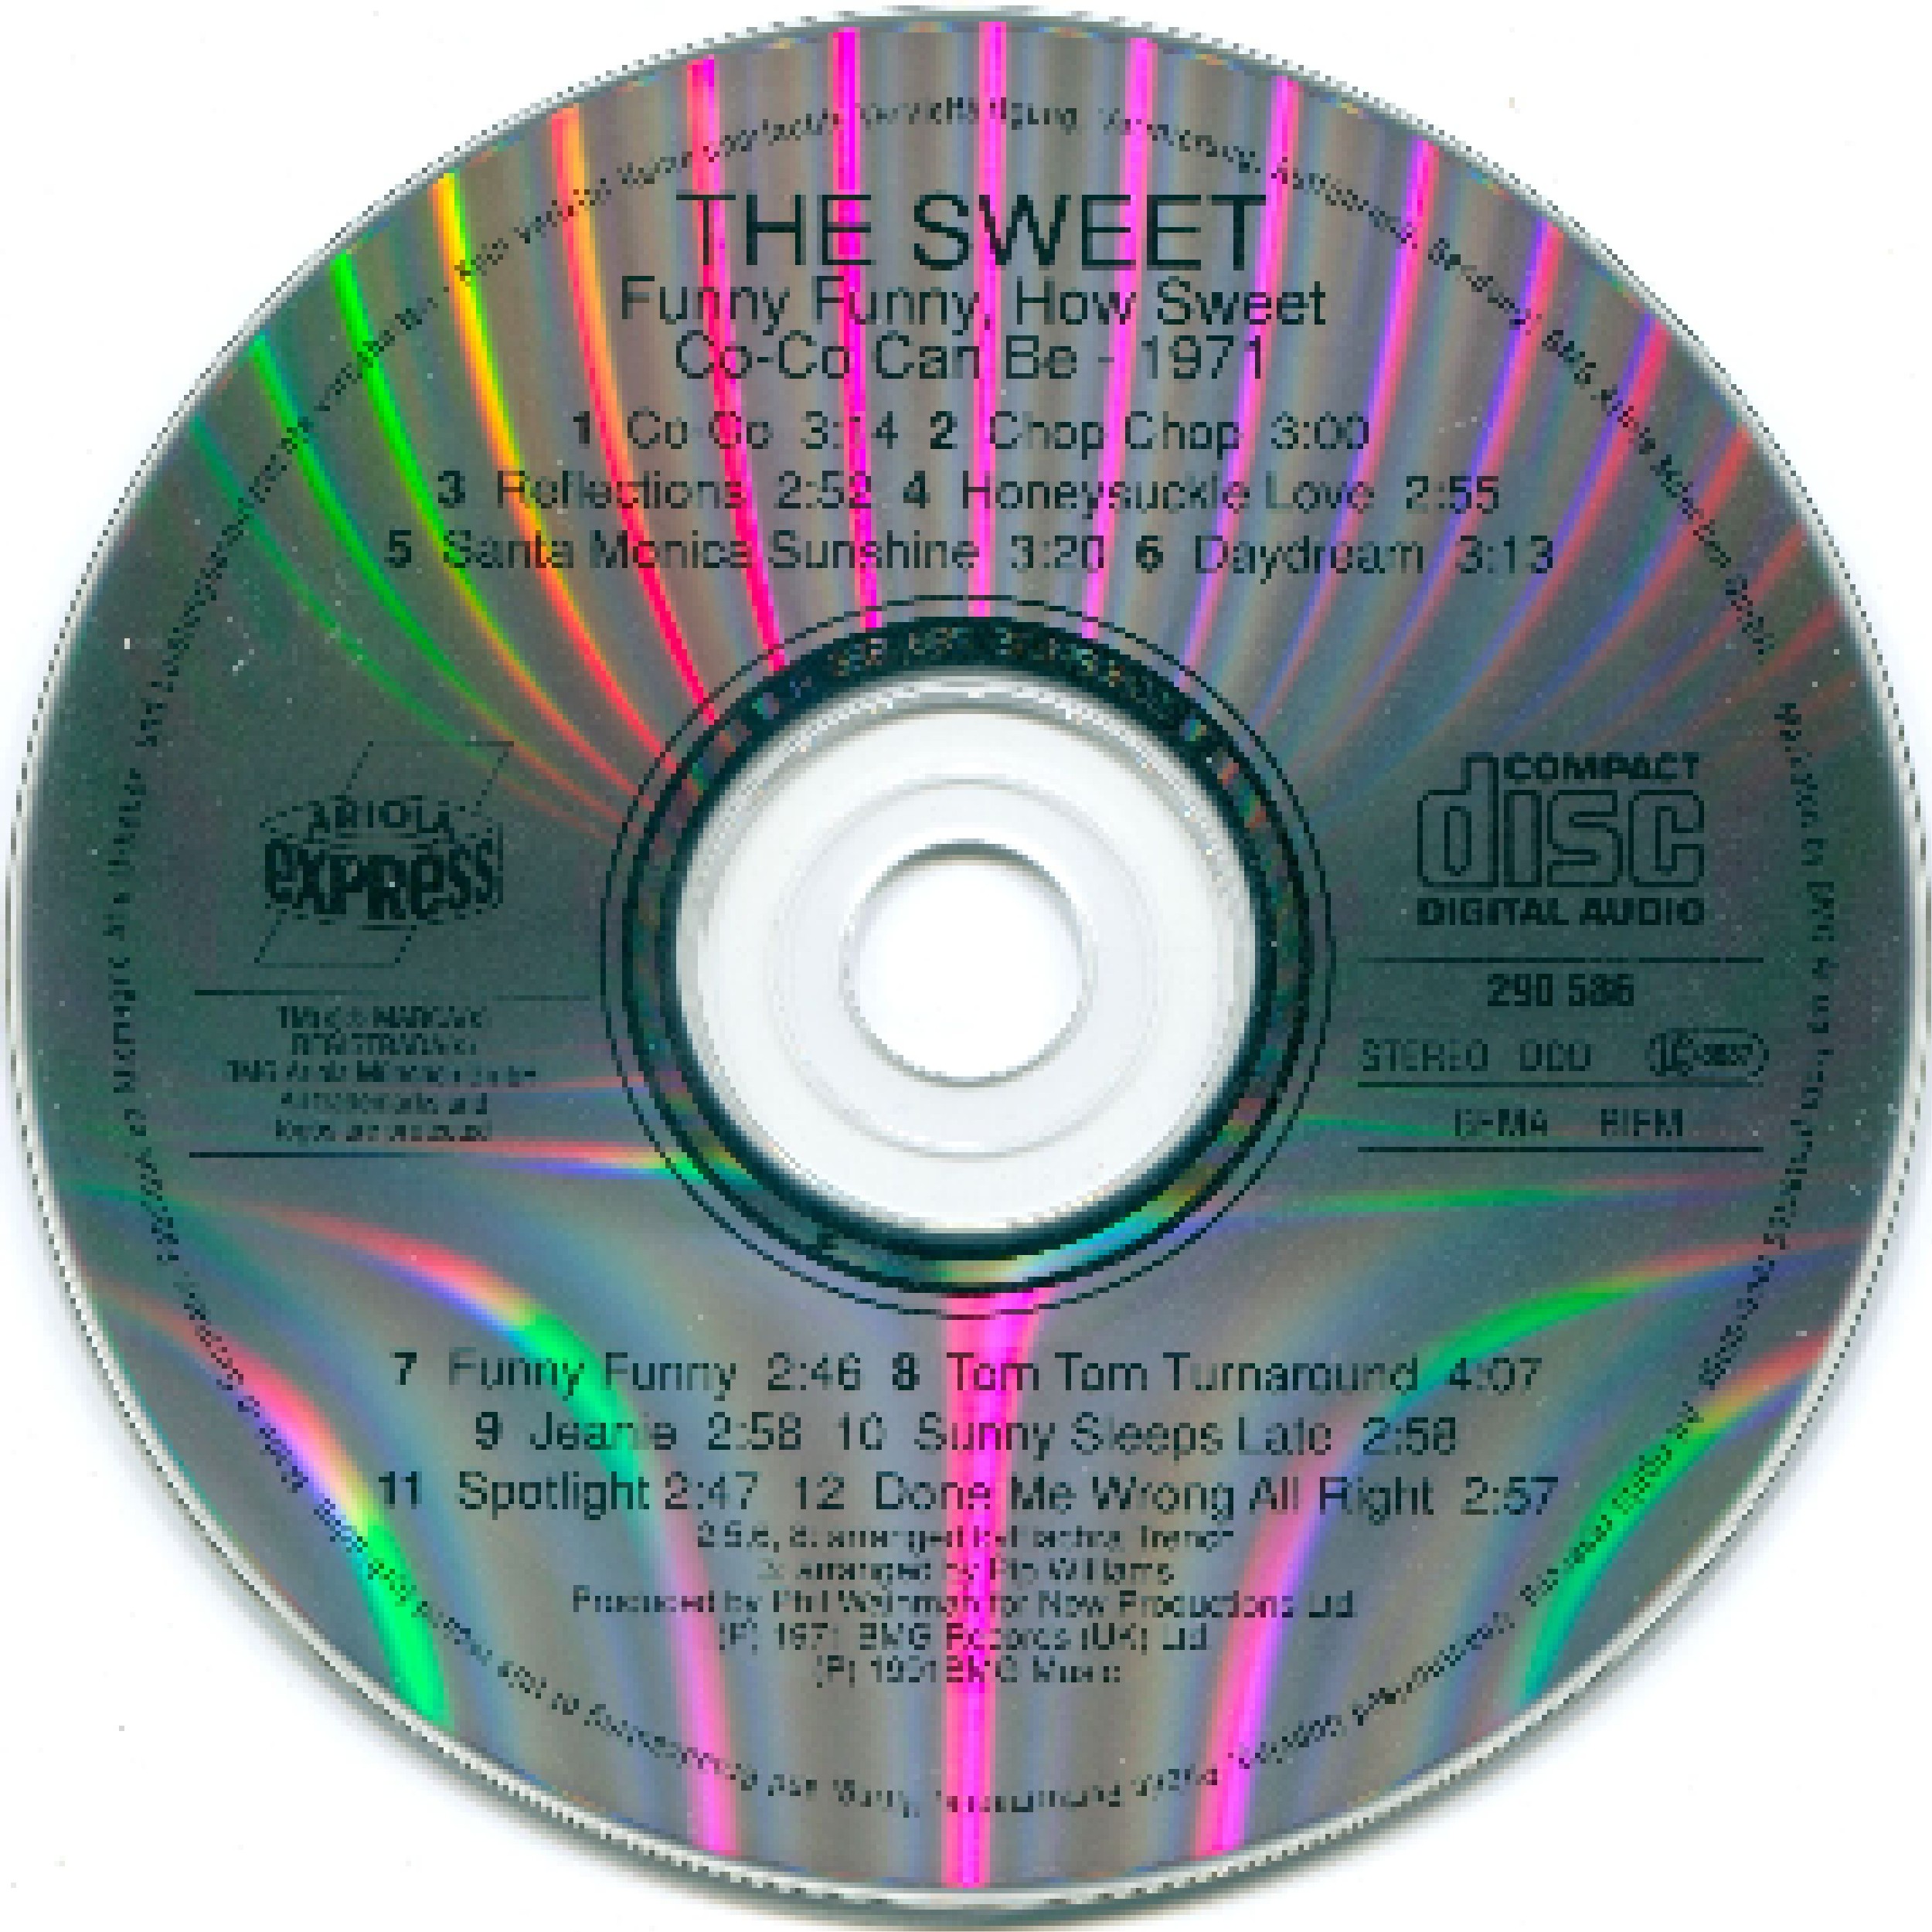 Funny Funny, How Sweet Co-Co Can Be | CD (1991, Re-Release) von The Sweet